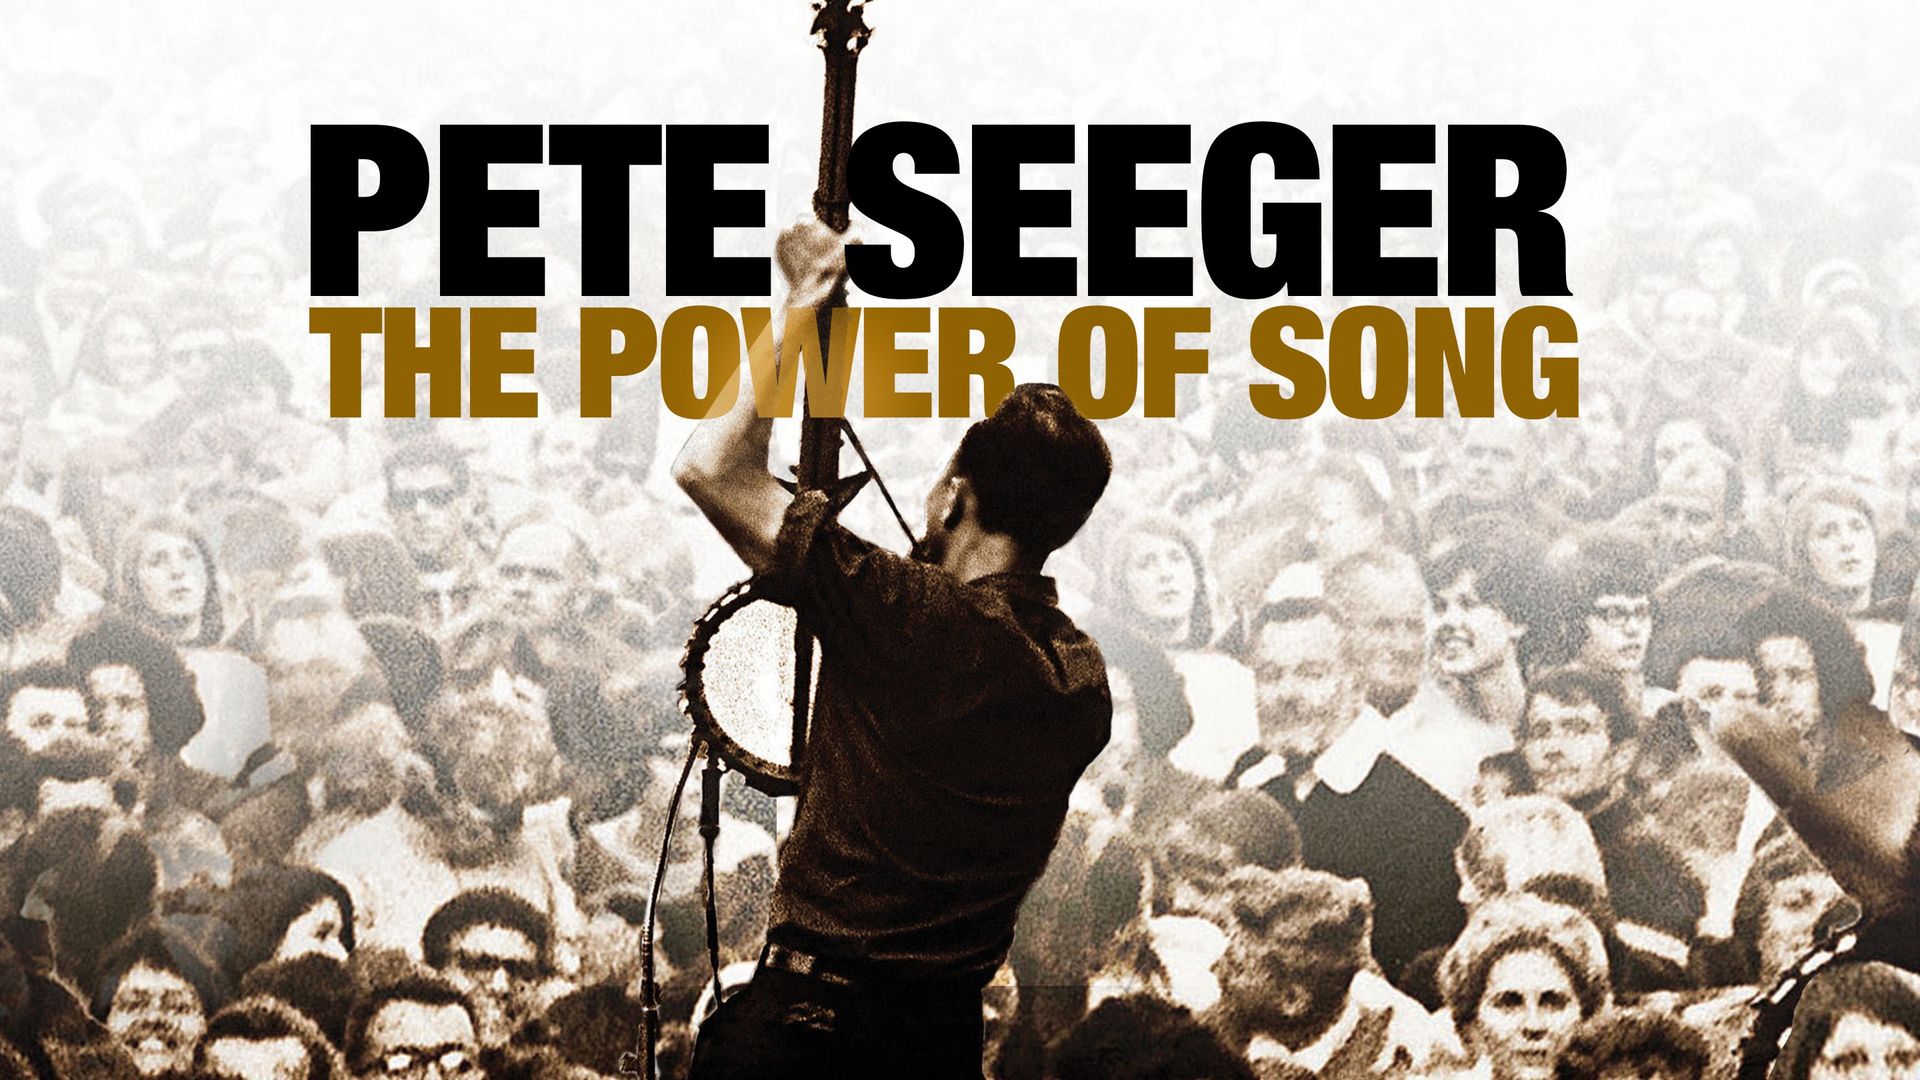 Pete Seeger: The Power of Song Backdrop